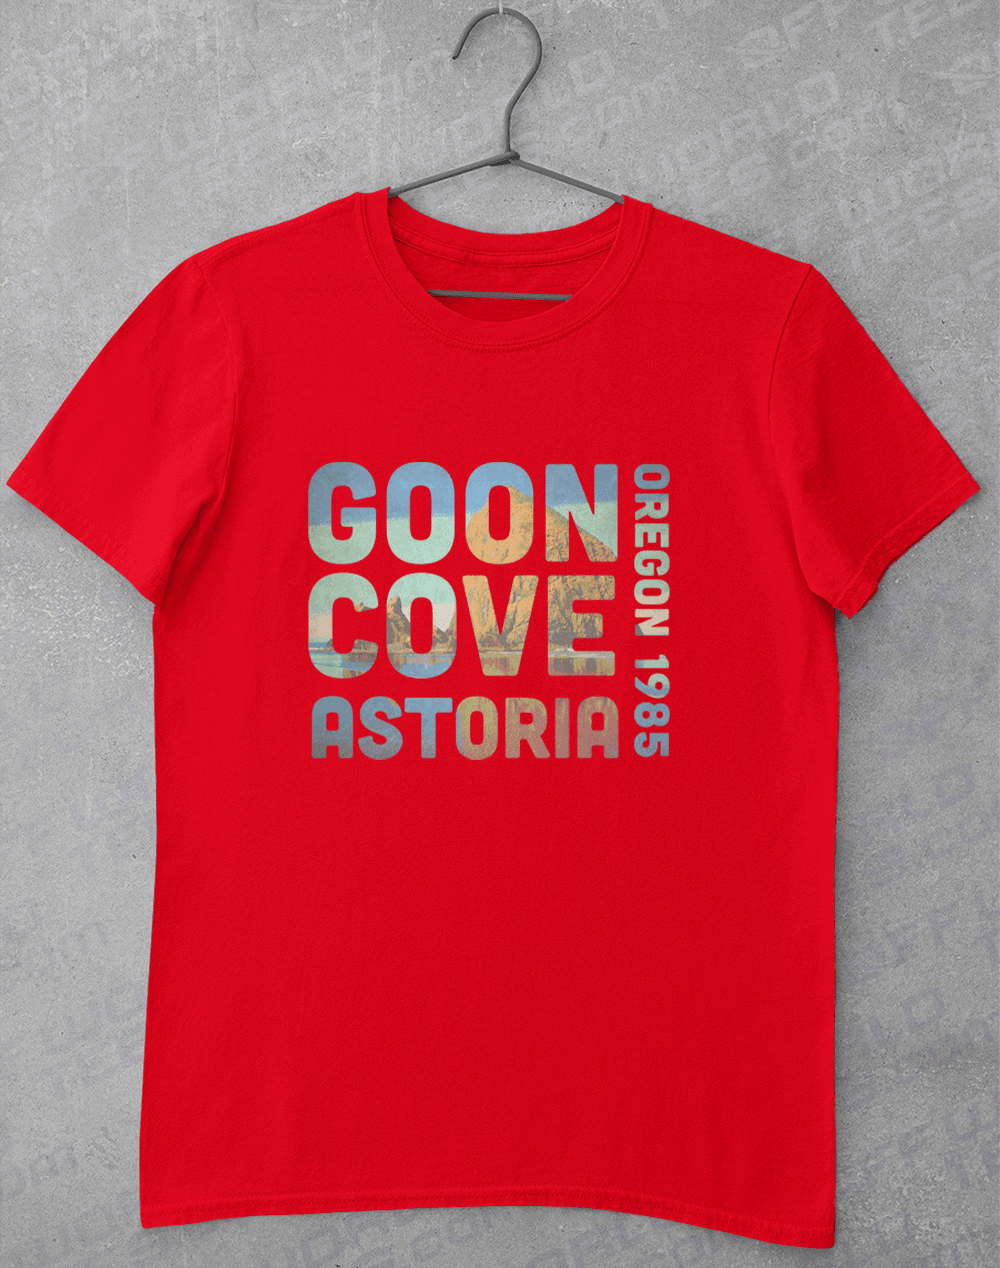 Goon Cove 1985 T-Shirt S / Red  - Off World Tees